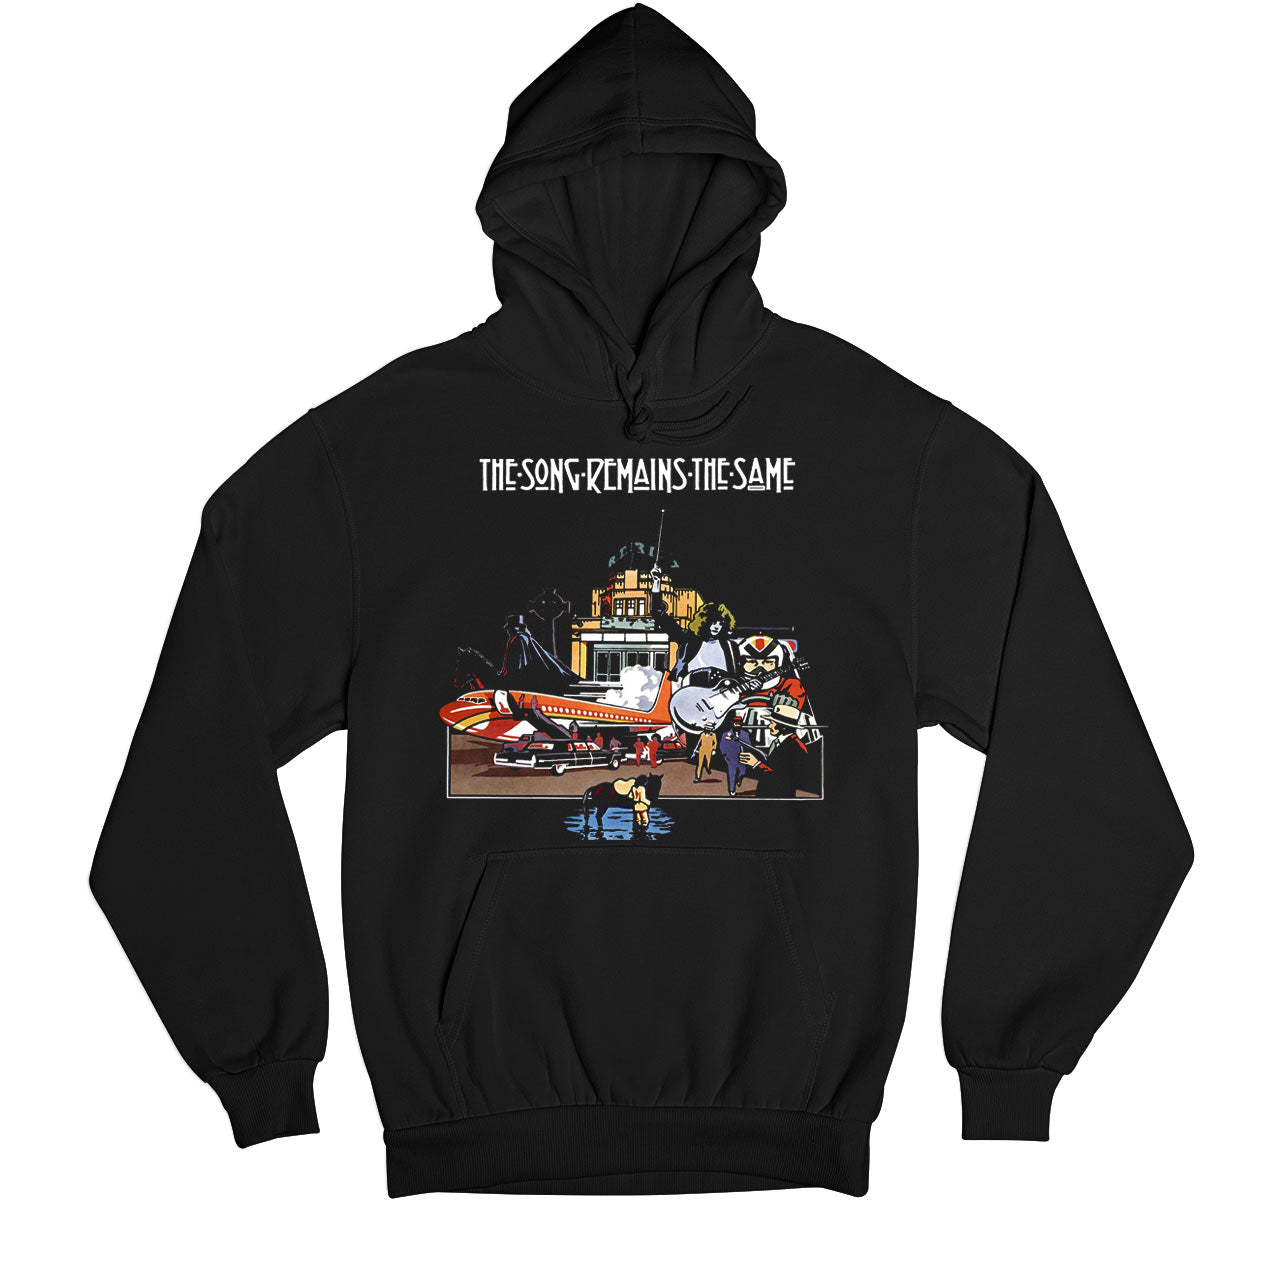 Led Zeppelin Hoodie - The Song Remains The Same Hooded Sweatshirt The Banyan Tee TBT